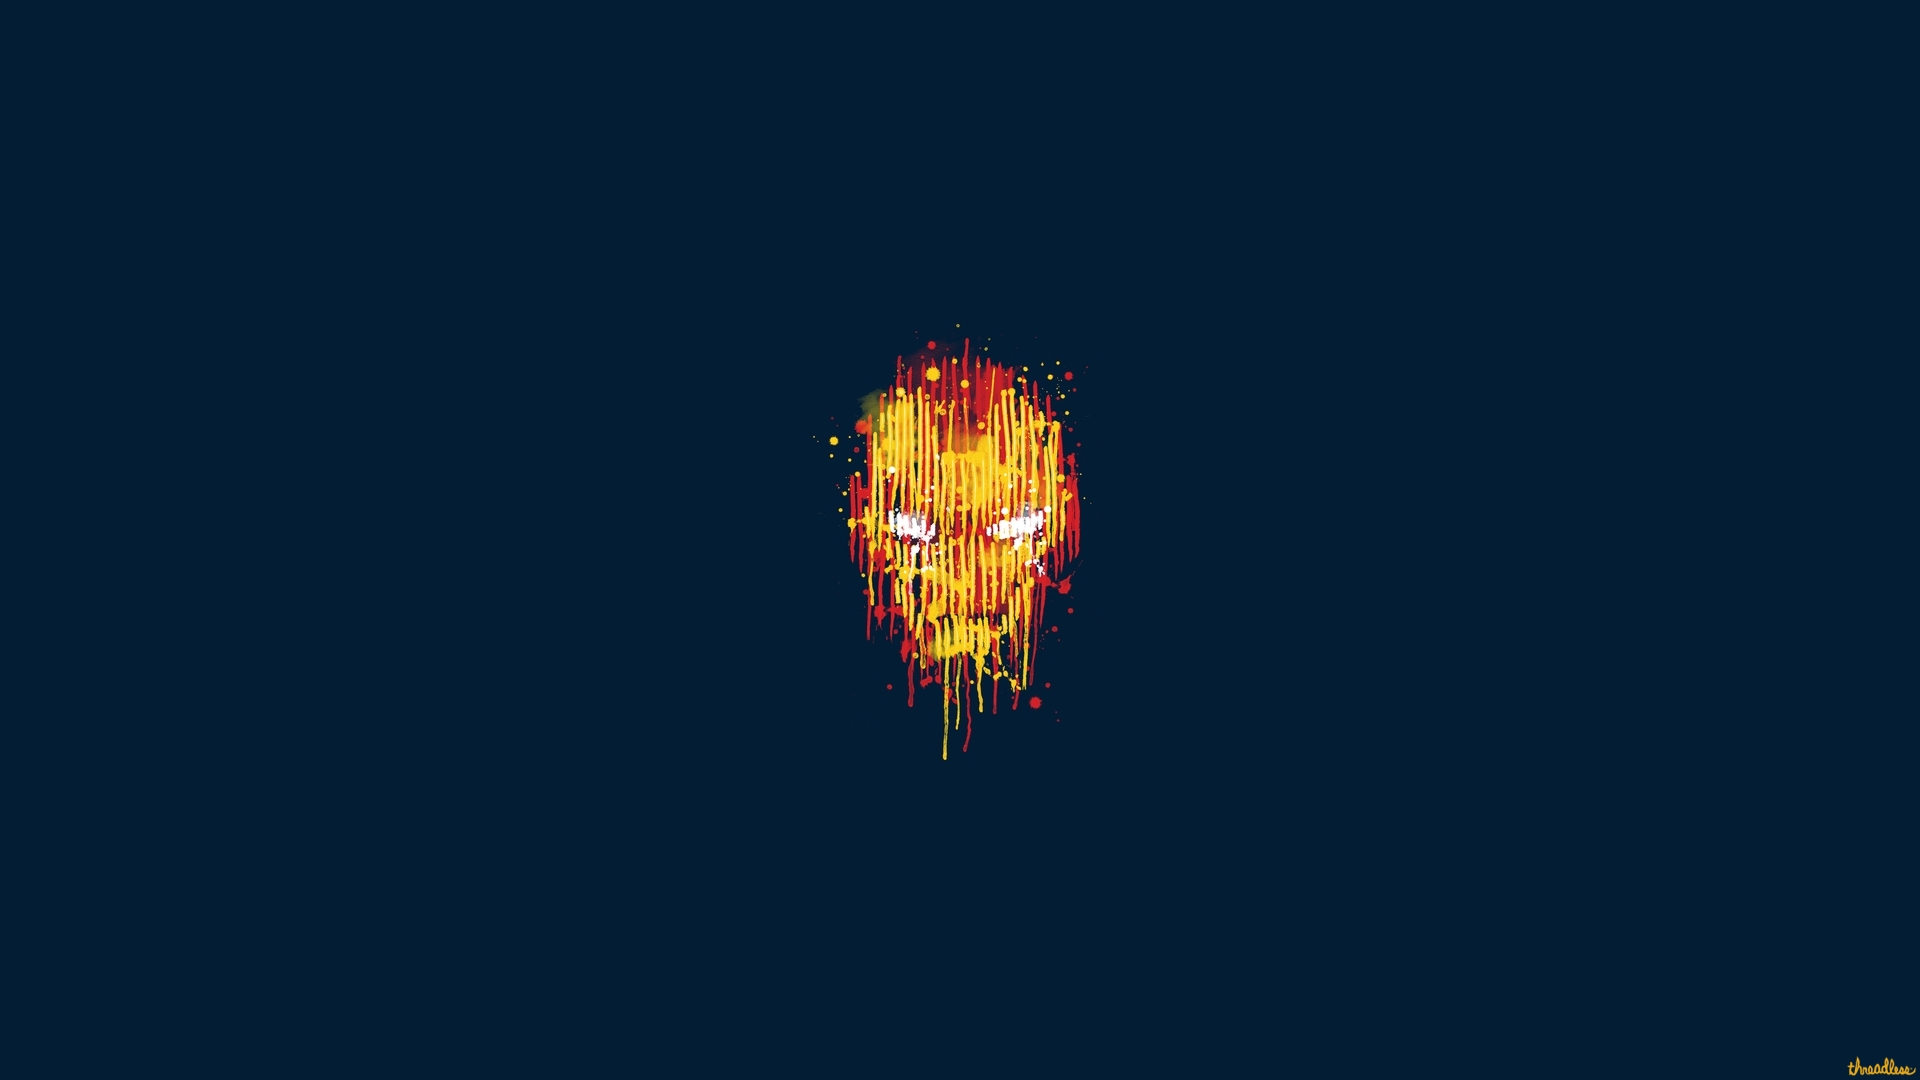  Iron  Man  Full HD Wallpaper  and Background  Image 